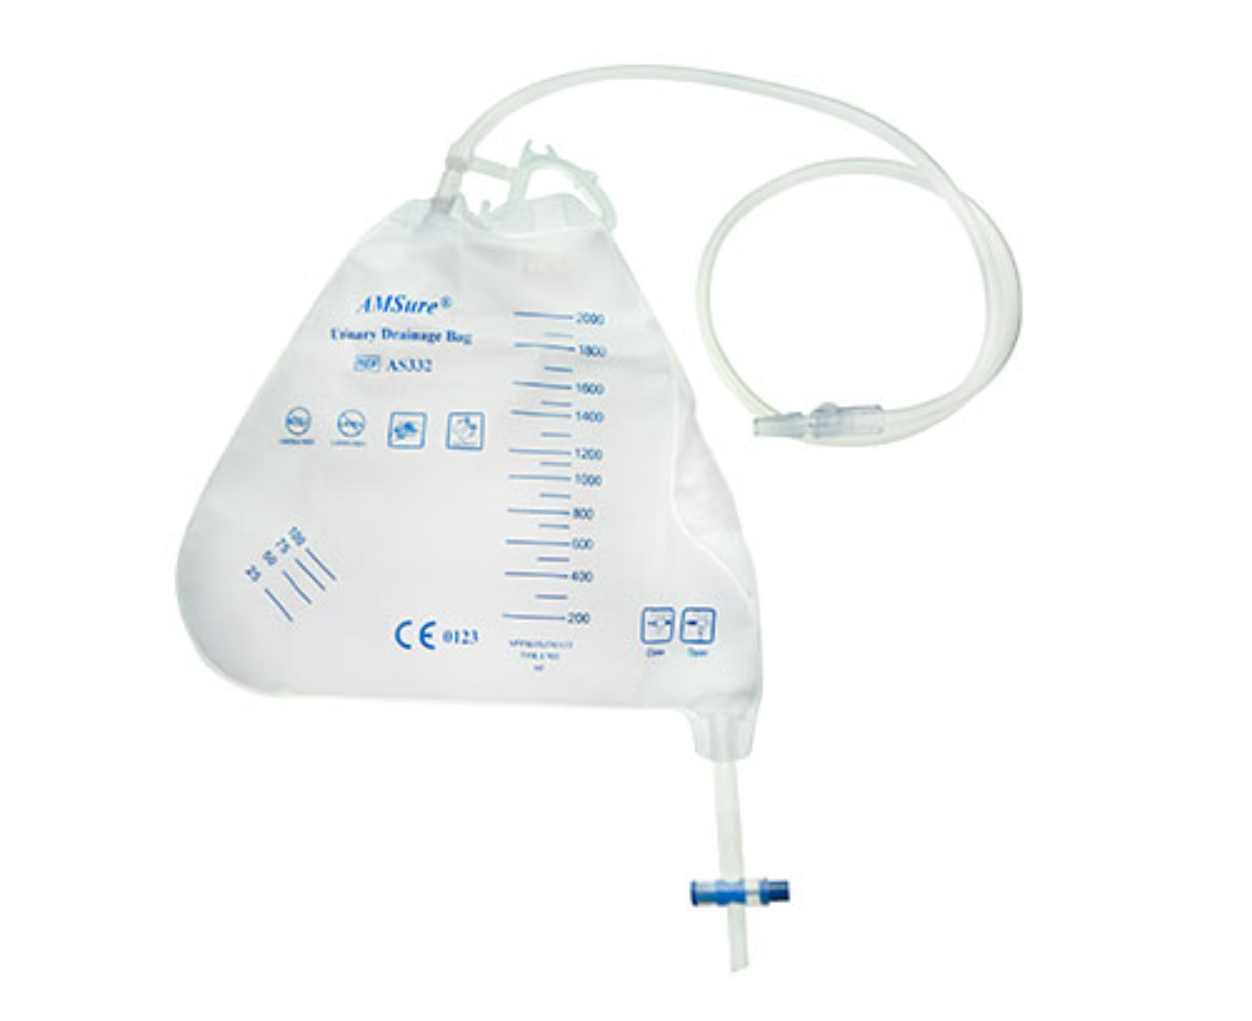 AMSure Night Drainage Bag, 2000ml, Anti-Reflux Chamber, Pre-Pierced Needle-Free Sampling Port (Luer Slip or Blunt Cannula Compatible), Single Hook and Rope Hanger, T-Tap Drain Port, Sterile Fluid Pathway, Latex Free